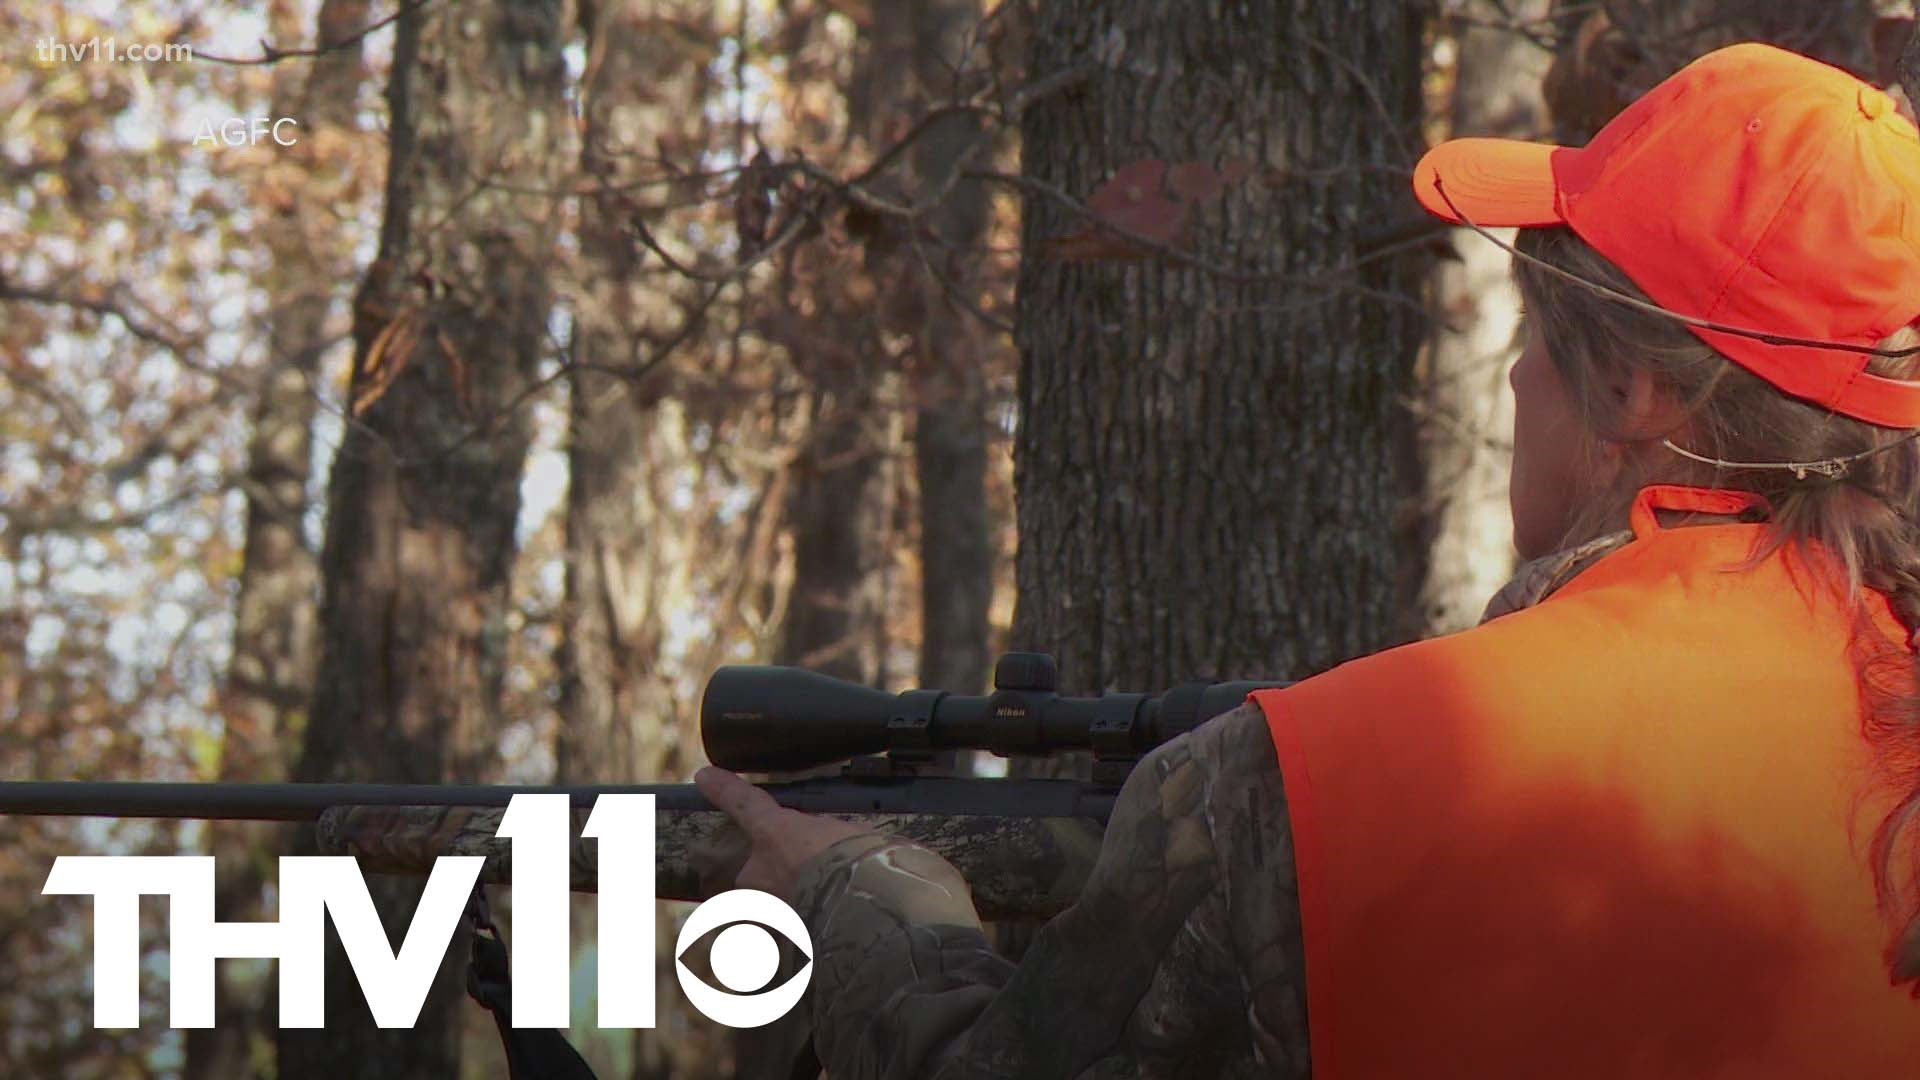 With deer hunting set to begin in full swing, local group "Arkansas Hunters Feeding the Hungry," treats it as an opportunity to help those in need.